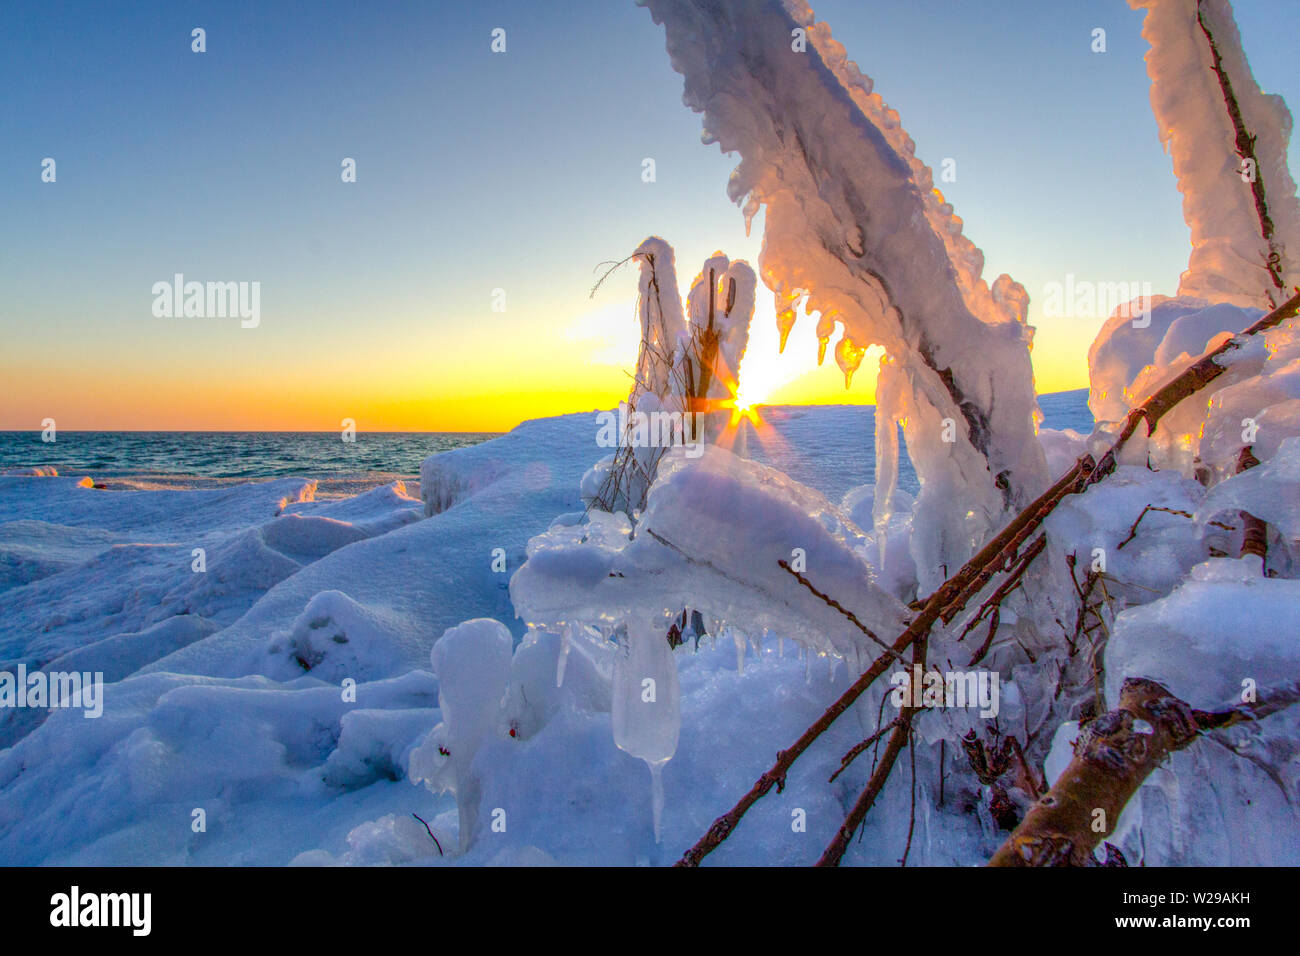 Ice Formations On The Coast Of Lake Michigan. Beautiful sunset on the coast of Lake Michigan with ice formations on the shore of Sleeping Bear Dunes. Stock Photo